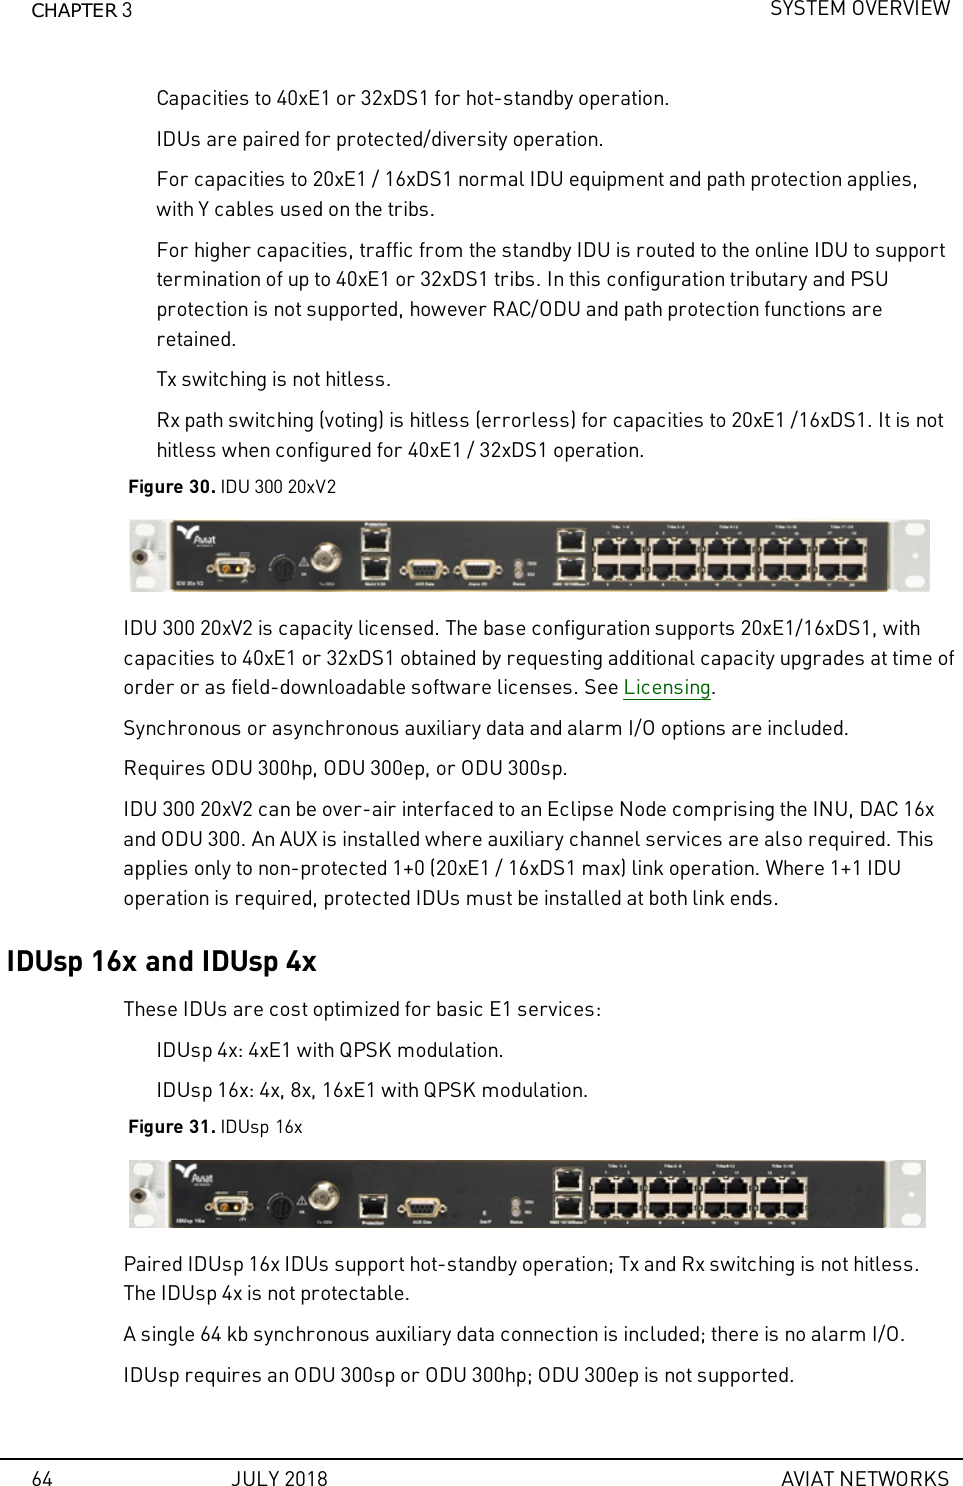 CHAPTER 3SYSTEM OVERVIEWCapacities to 40xE1 or 32xDS1 for hot-standby operation.IDUs are paired for protected/diversity operation.For capacities to 20xE1 / 16xDS1 normal IDU equipment and path protection applies,with Y cables used on the tribs.For higher capacities, traffic from the standby IDU is routed to the online IDU to supporttermination of up to 40xE1 or 32xDS1 tribs. In this configuration tributary and PSUprotection is not supported, however RAC/ODU and path protection functions areretained.Tx switching is not hitless.Rx path switching (voting) is hitless (errorless) for capacities to 20xE1 /16xDS1. It is nothitless when configured for 40xE1 / 32xDS1 operation.Figure 30. IDU 300 20xV2IDU 300 20xV2 is capacity licensed. The base configuration supports 20xE1/16xDS1, withcapacities to 40xE1 or 32xDS1 obtained by requesting additional capacity upgrades at time oforder or as field-downloadable software licenses. See Licensing.Synchronous or asynchronous auxiliary data and alarm I/O options are included.Requires ODU 300hp, ODU 300ep, or ODU 300sp.IDU 300 20xV2 can be over-air interfaced to an Eclipse Node comprising the INU, DAC 16xand ODU 300. An AUX is installed where auxiliary channel services are also required. Thisapplies only to non-protected 1+0 (20xE1 / 16xDS1 max) link operation. Where 1+1 IDUoperation is required, protected IDUs must be installed at both link ends.IDUsp 16x and IDUsp 4xThese IDUs are cost optimized for basic E1 services:IDUsp 4x: 4xE1 with QPSK modulation.IDUsp 16x: 4x, 8x, 16xE1 with QPSK modulation.Figure 31. IDUsp 16xPaired IDUsp 16x IDUs support hot-standby operation; Tx and Rx switching is not hitless.The IDUsp 4x is not protectable.A single 64 kb synchronous auxiliary data connection is included; there is no alarm I/O.IDUsp requires an ODU 300sp or ODU 300hp; ODU 300ep is not supported.64 JULY 2018 AVIAT NETWORKS